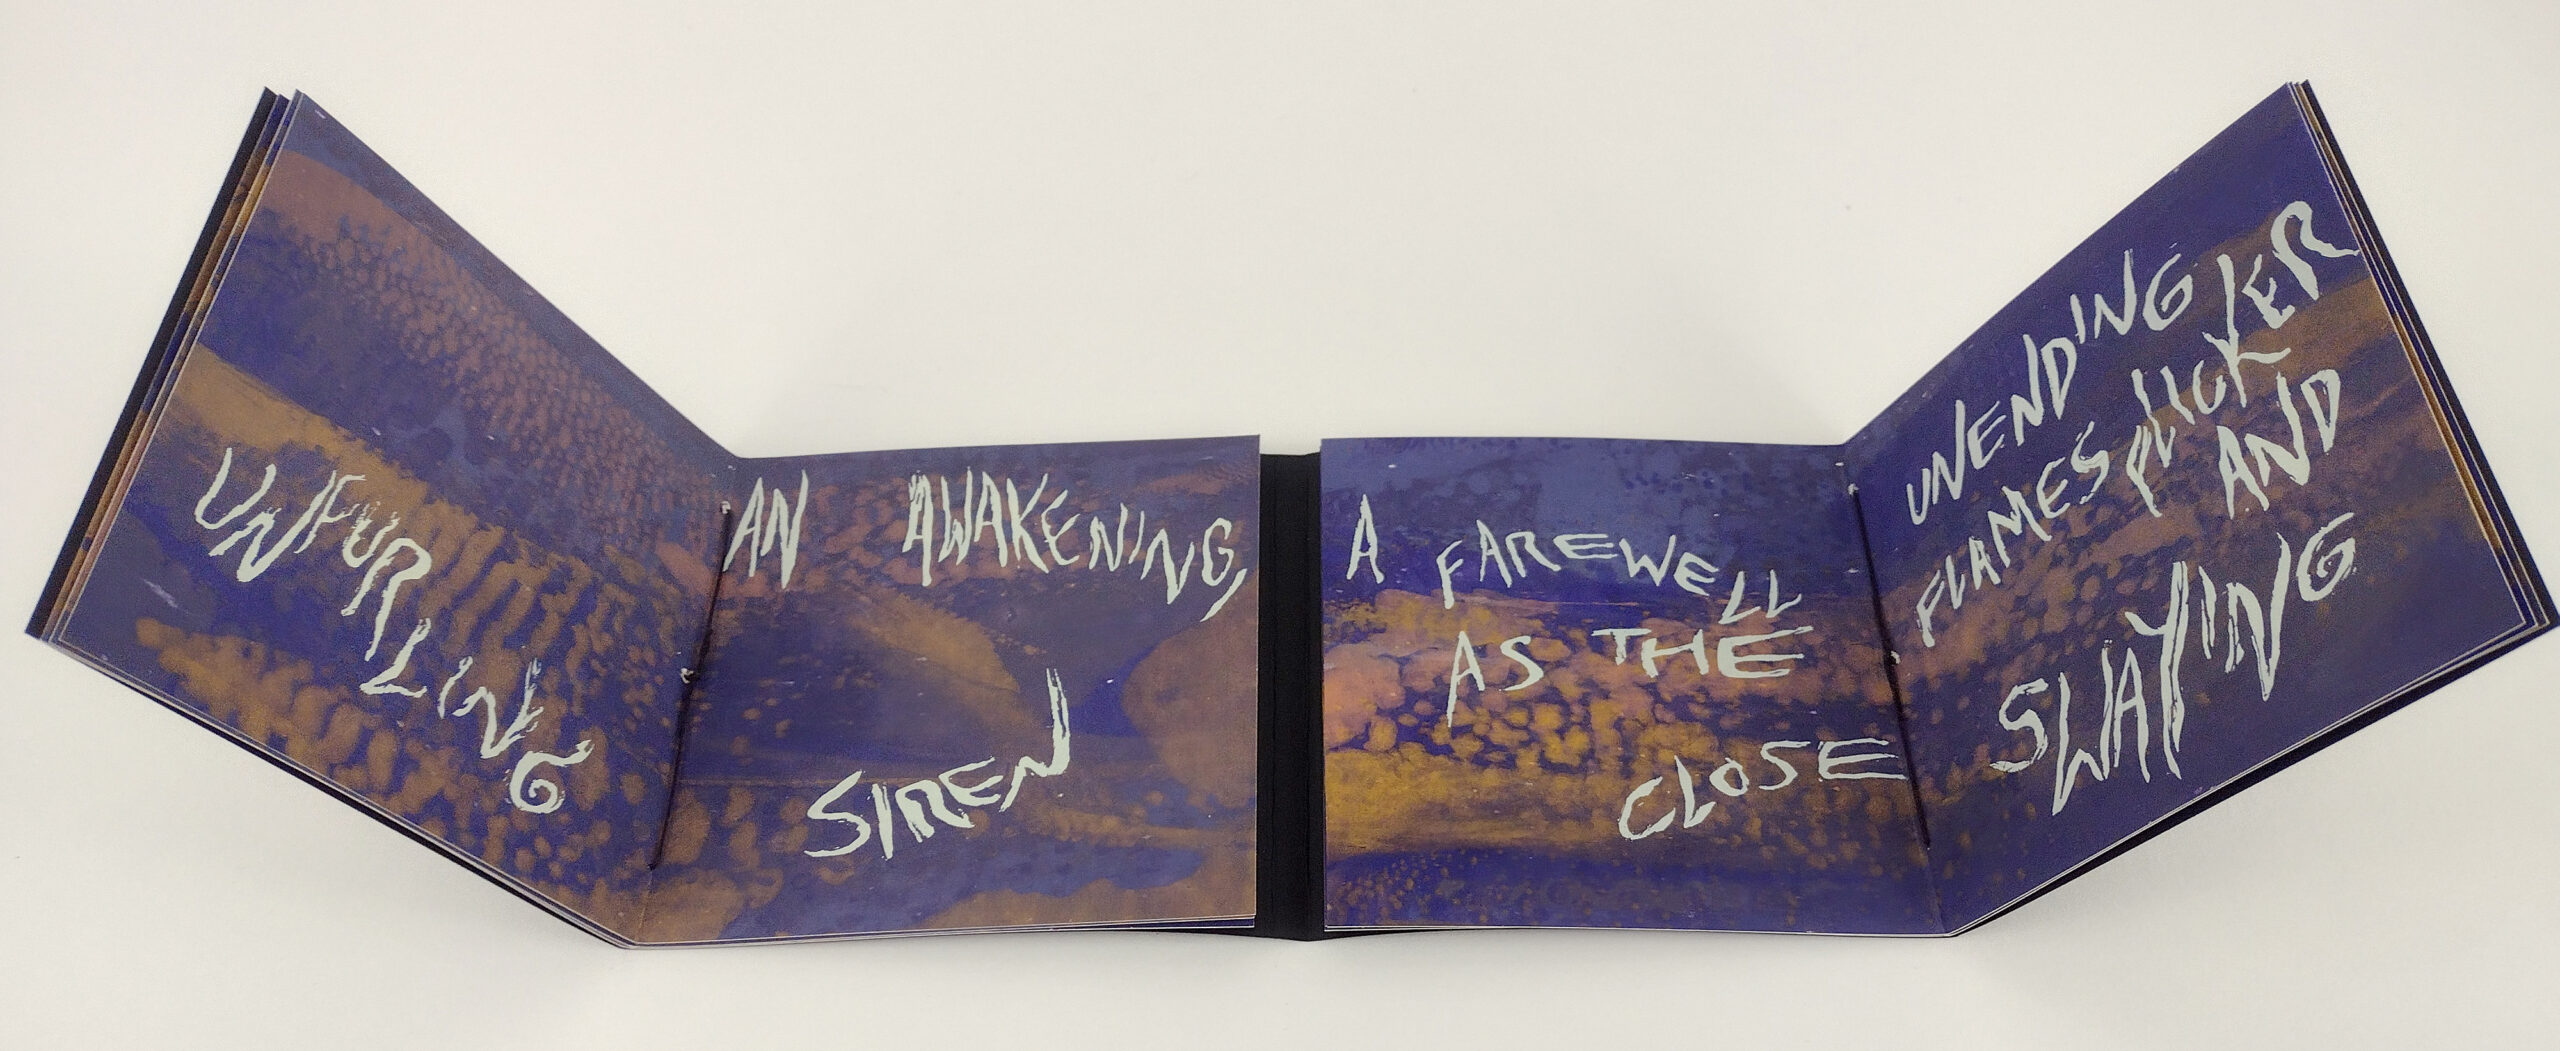 an open artist's book is screenprinted with text reading, "an awakening, unfurling siren / a farewell unending as the flames flicker and close swaying"